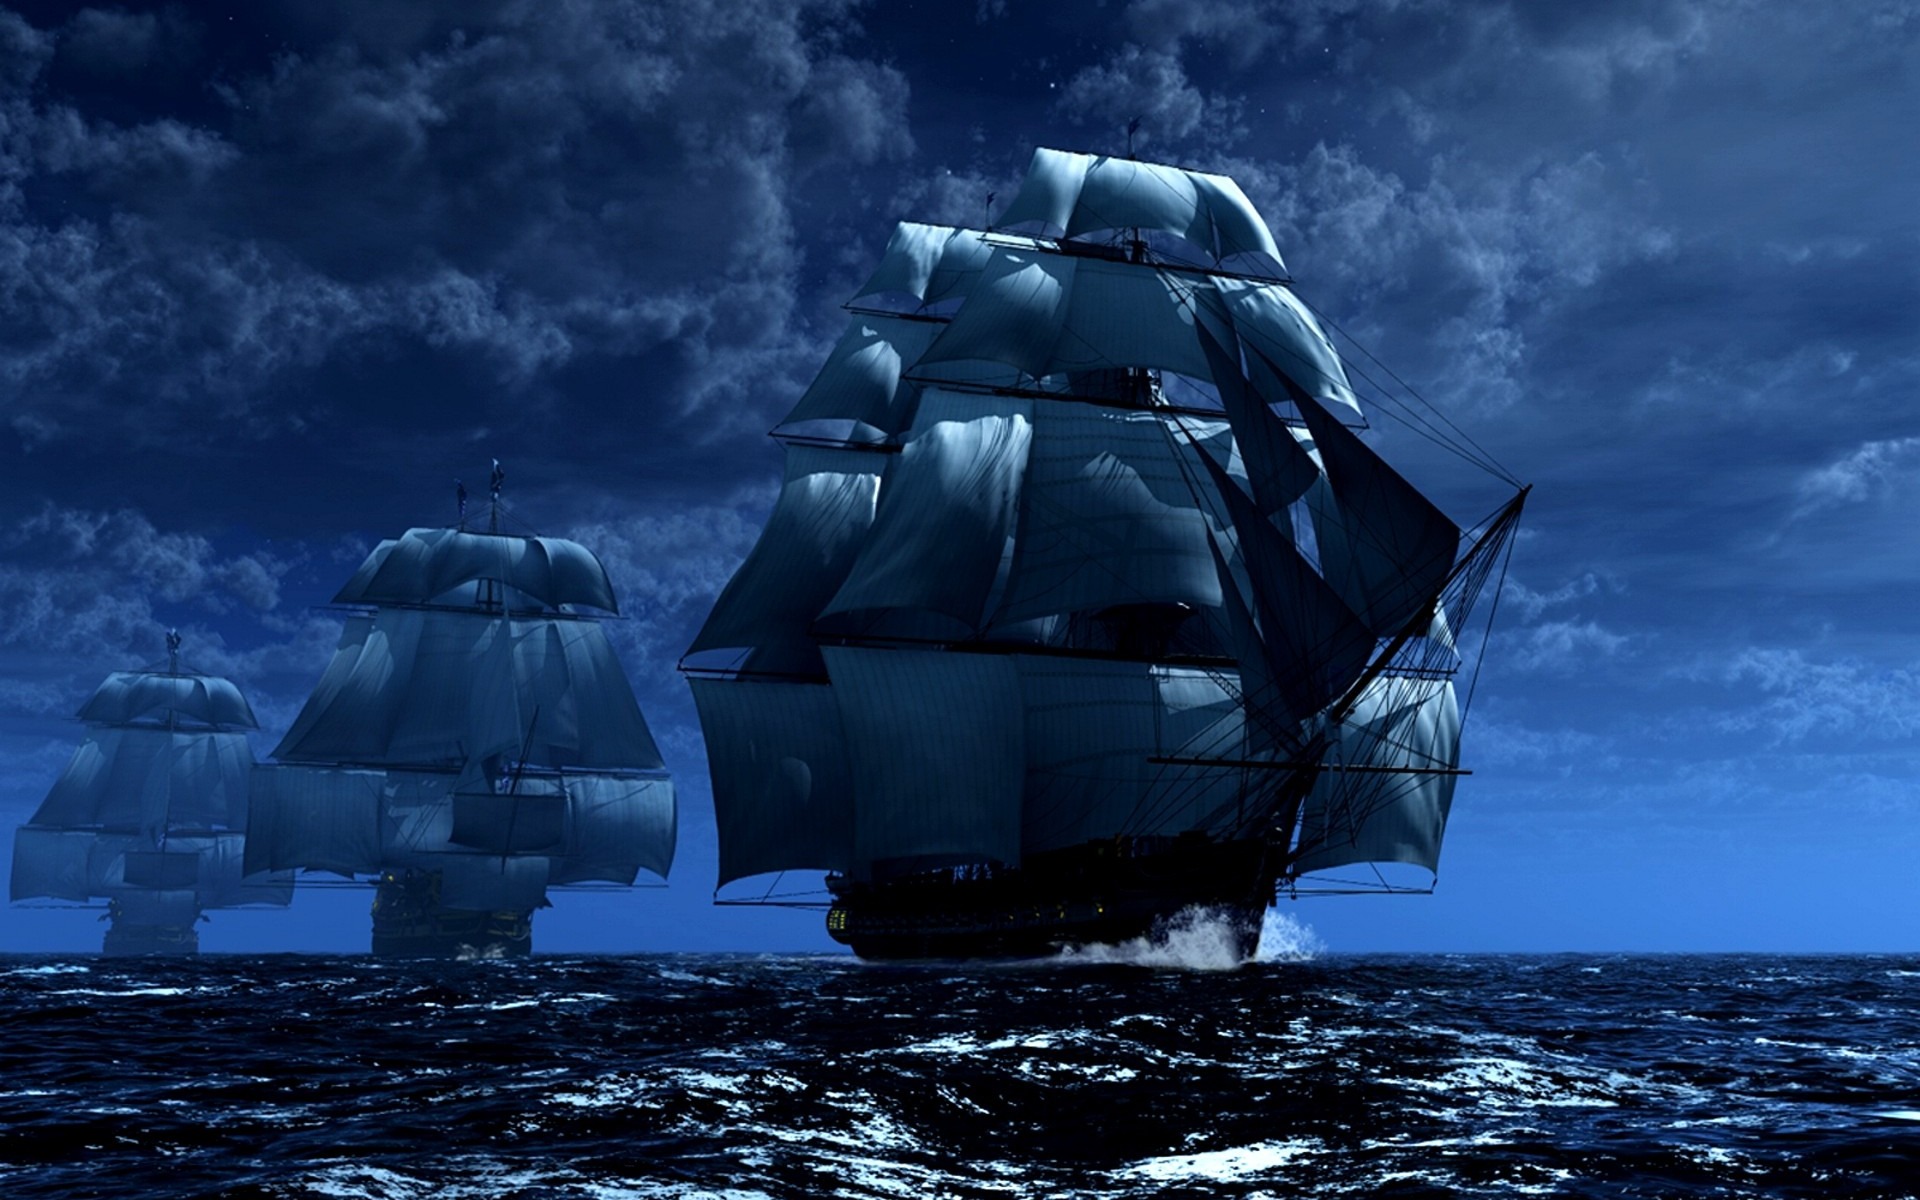 The sailing ships wallpapers and images   wallpapers pictures photos 1920x1200